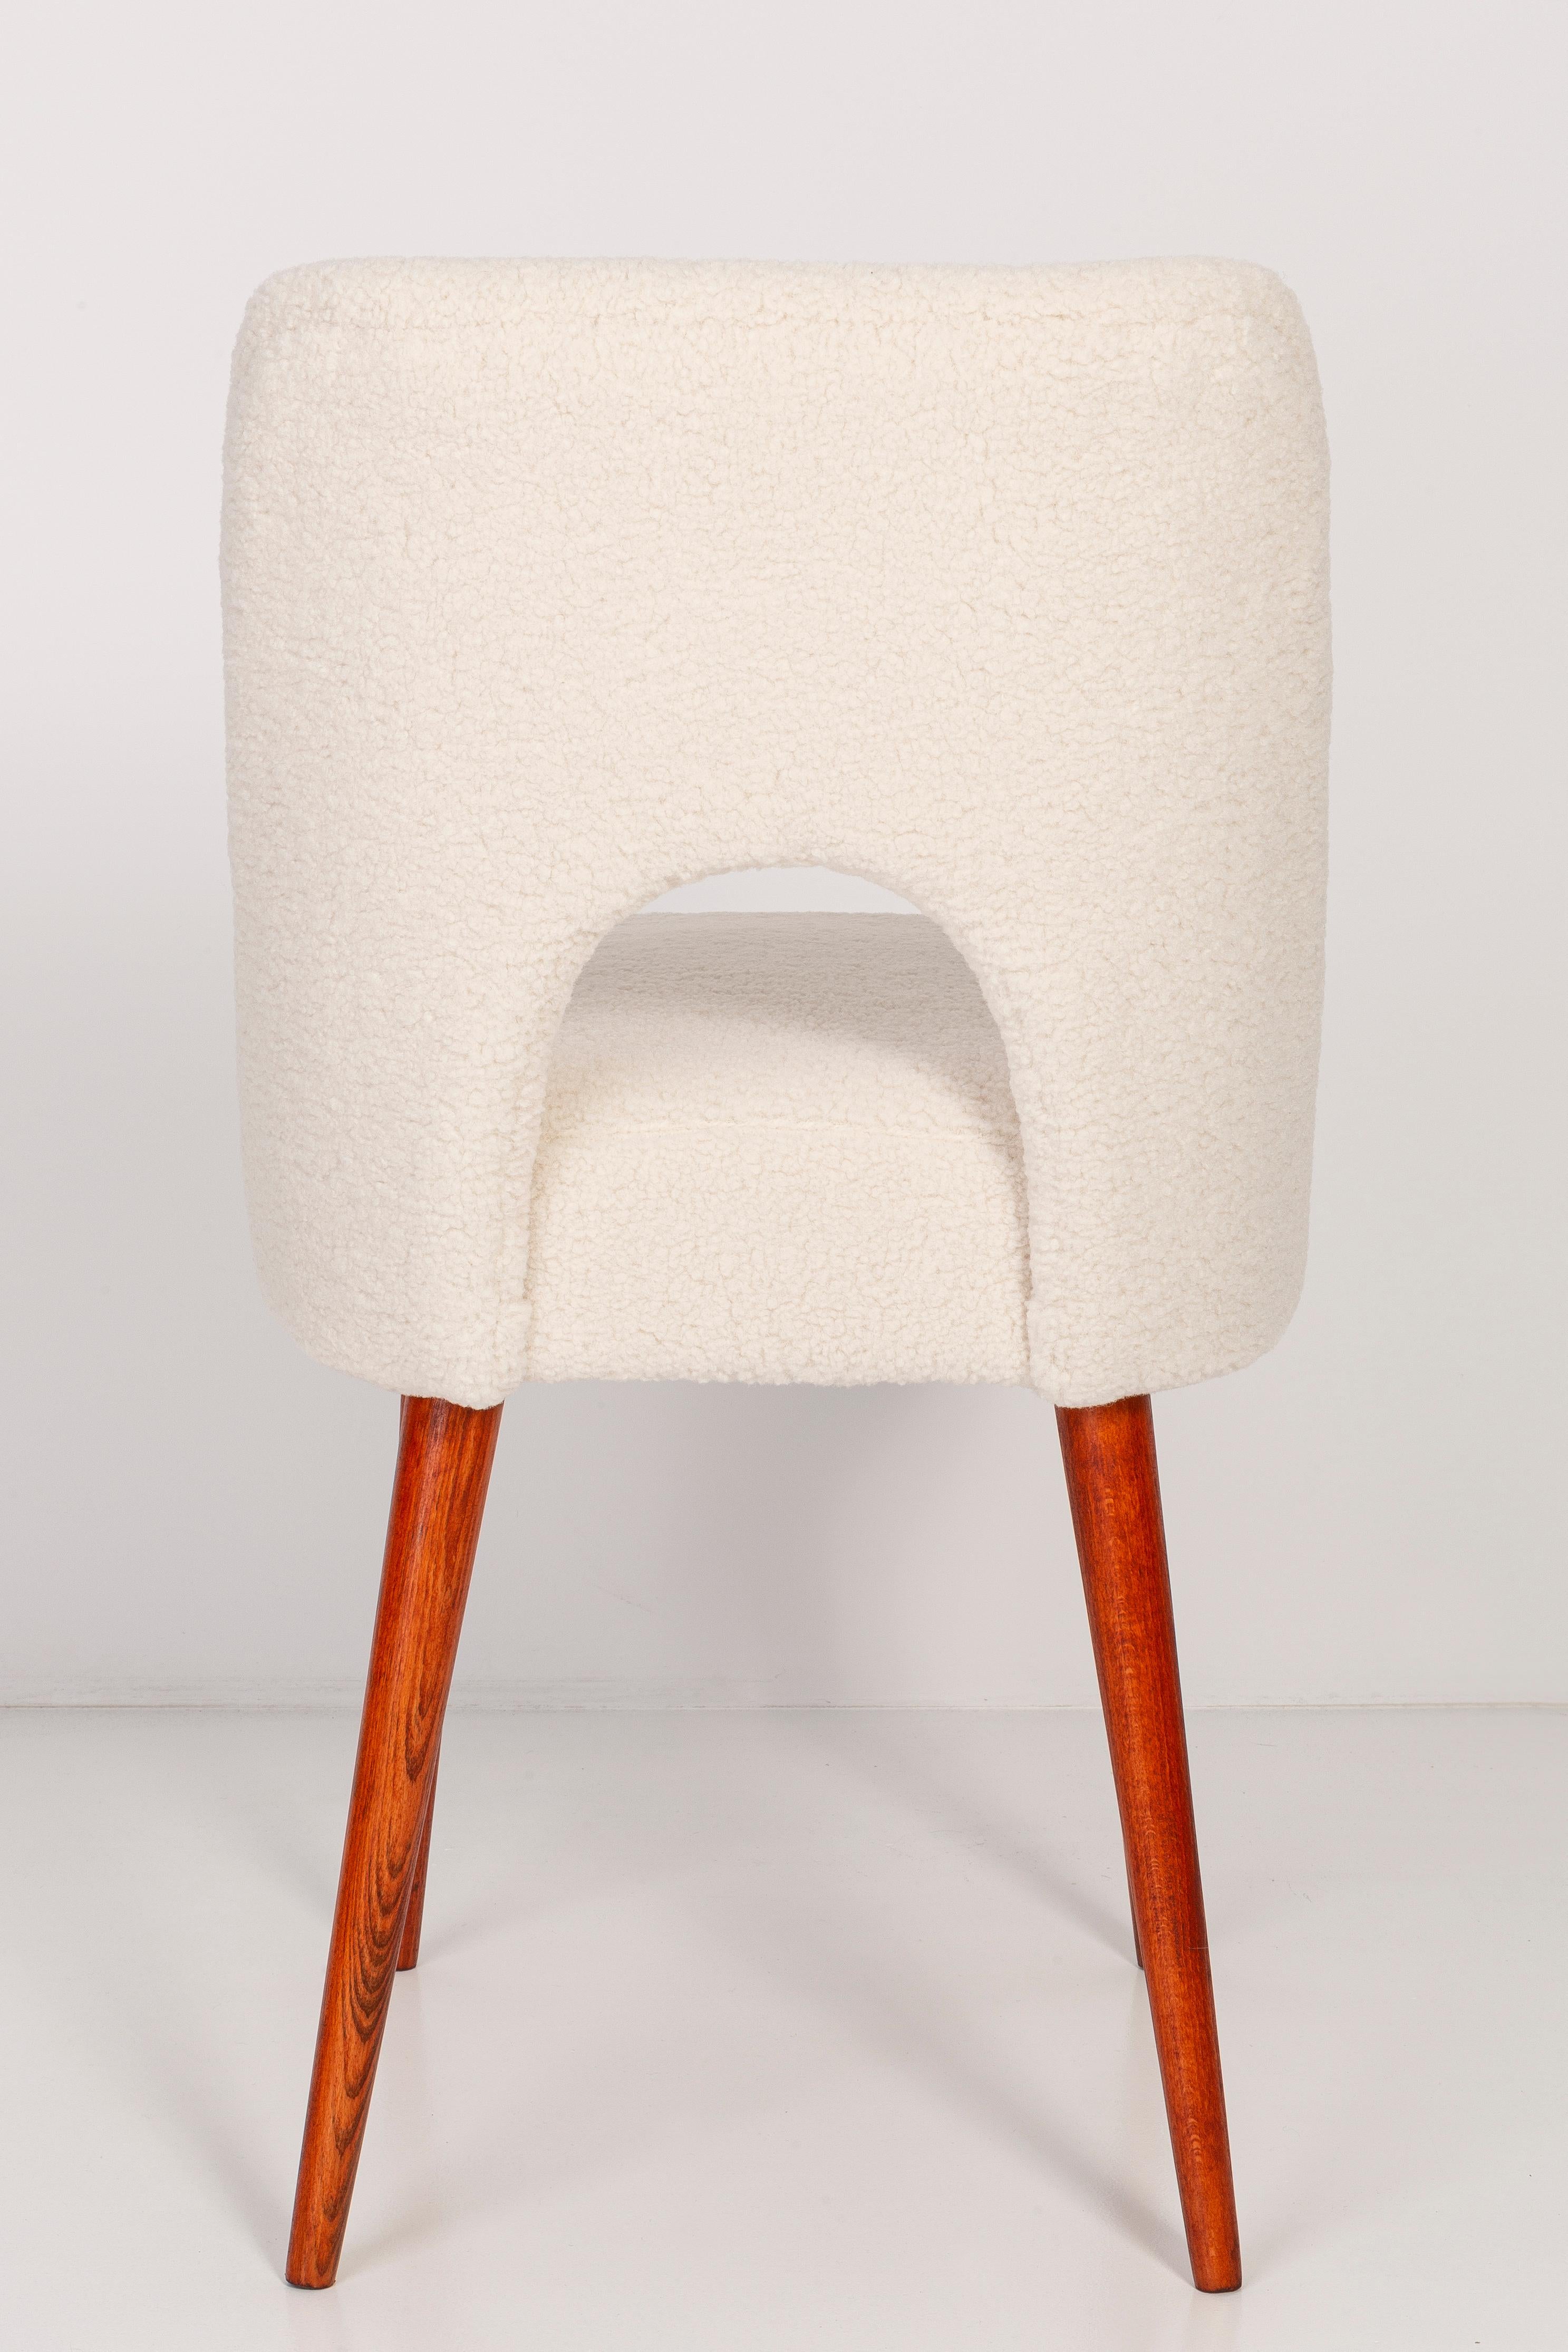 Set of Two Light Crème Boucle 'Shell' Chairs, 1960s For Sale 2